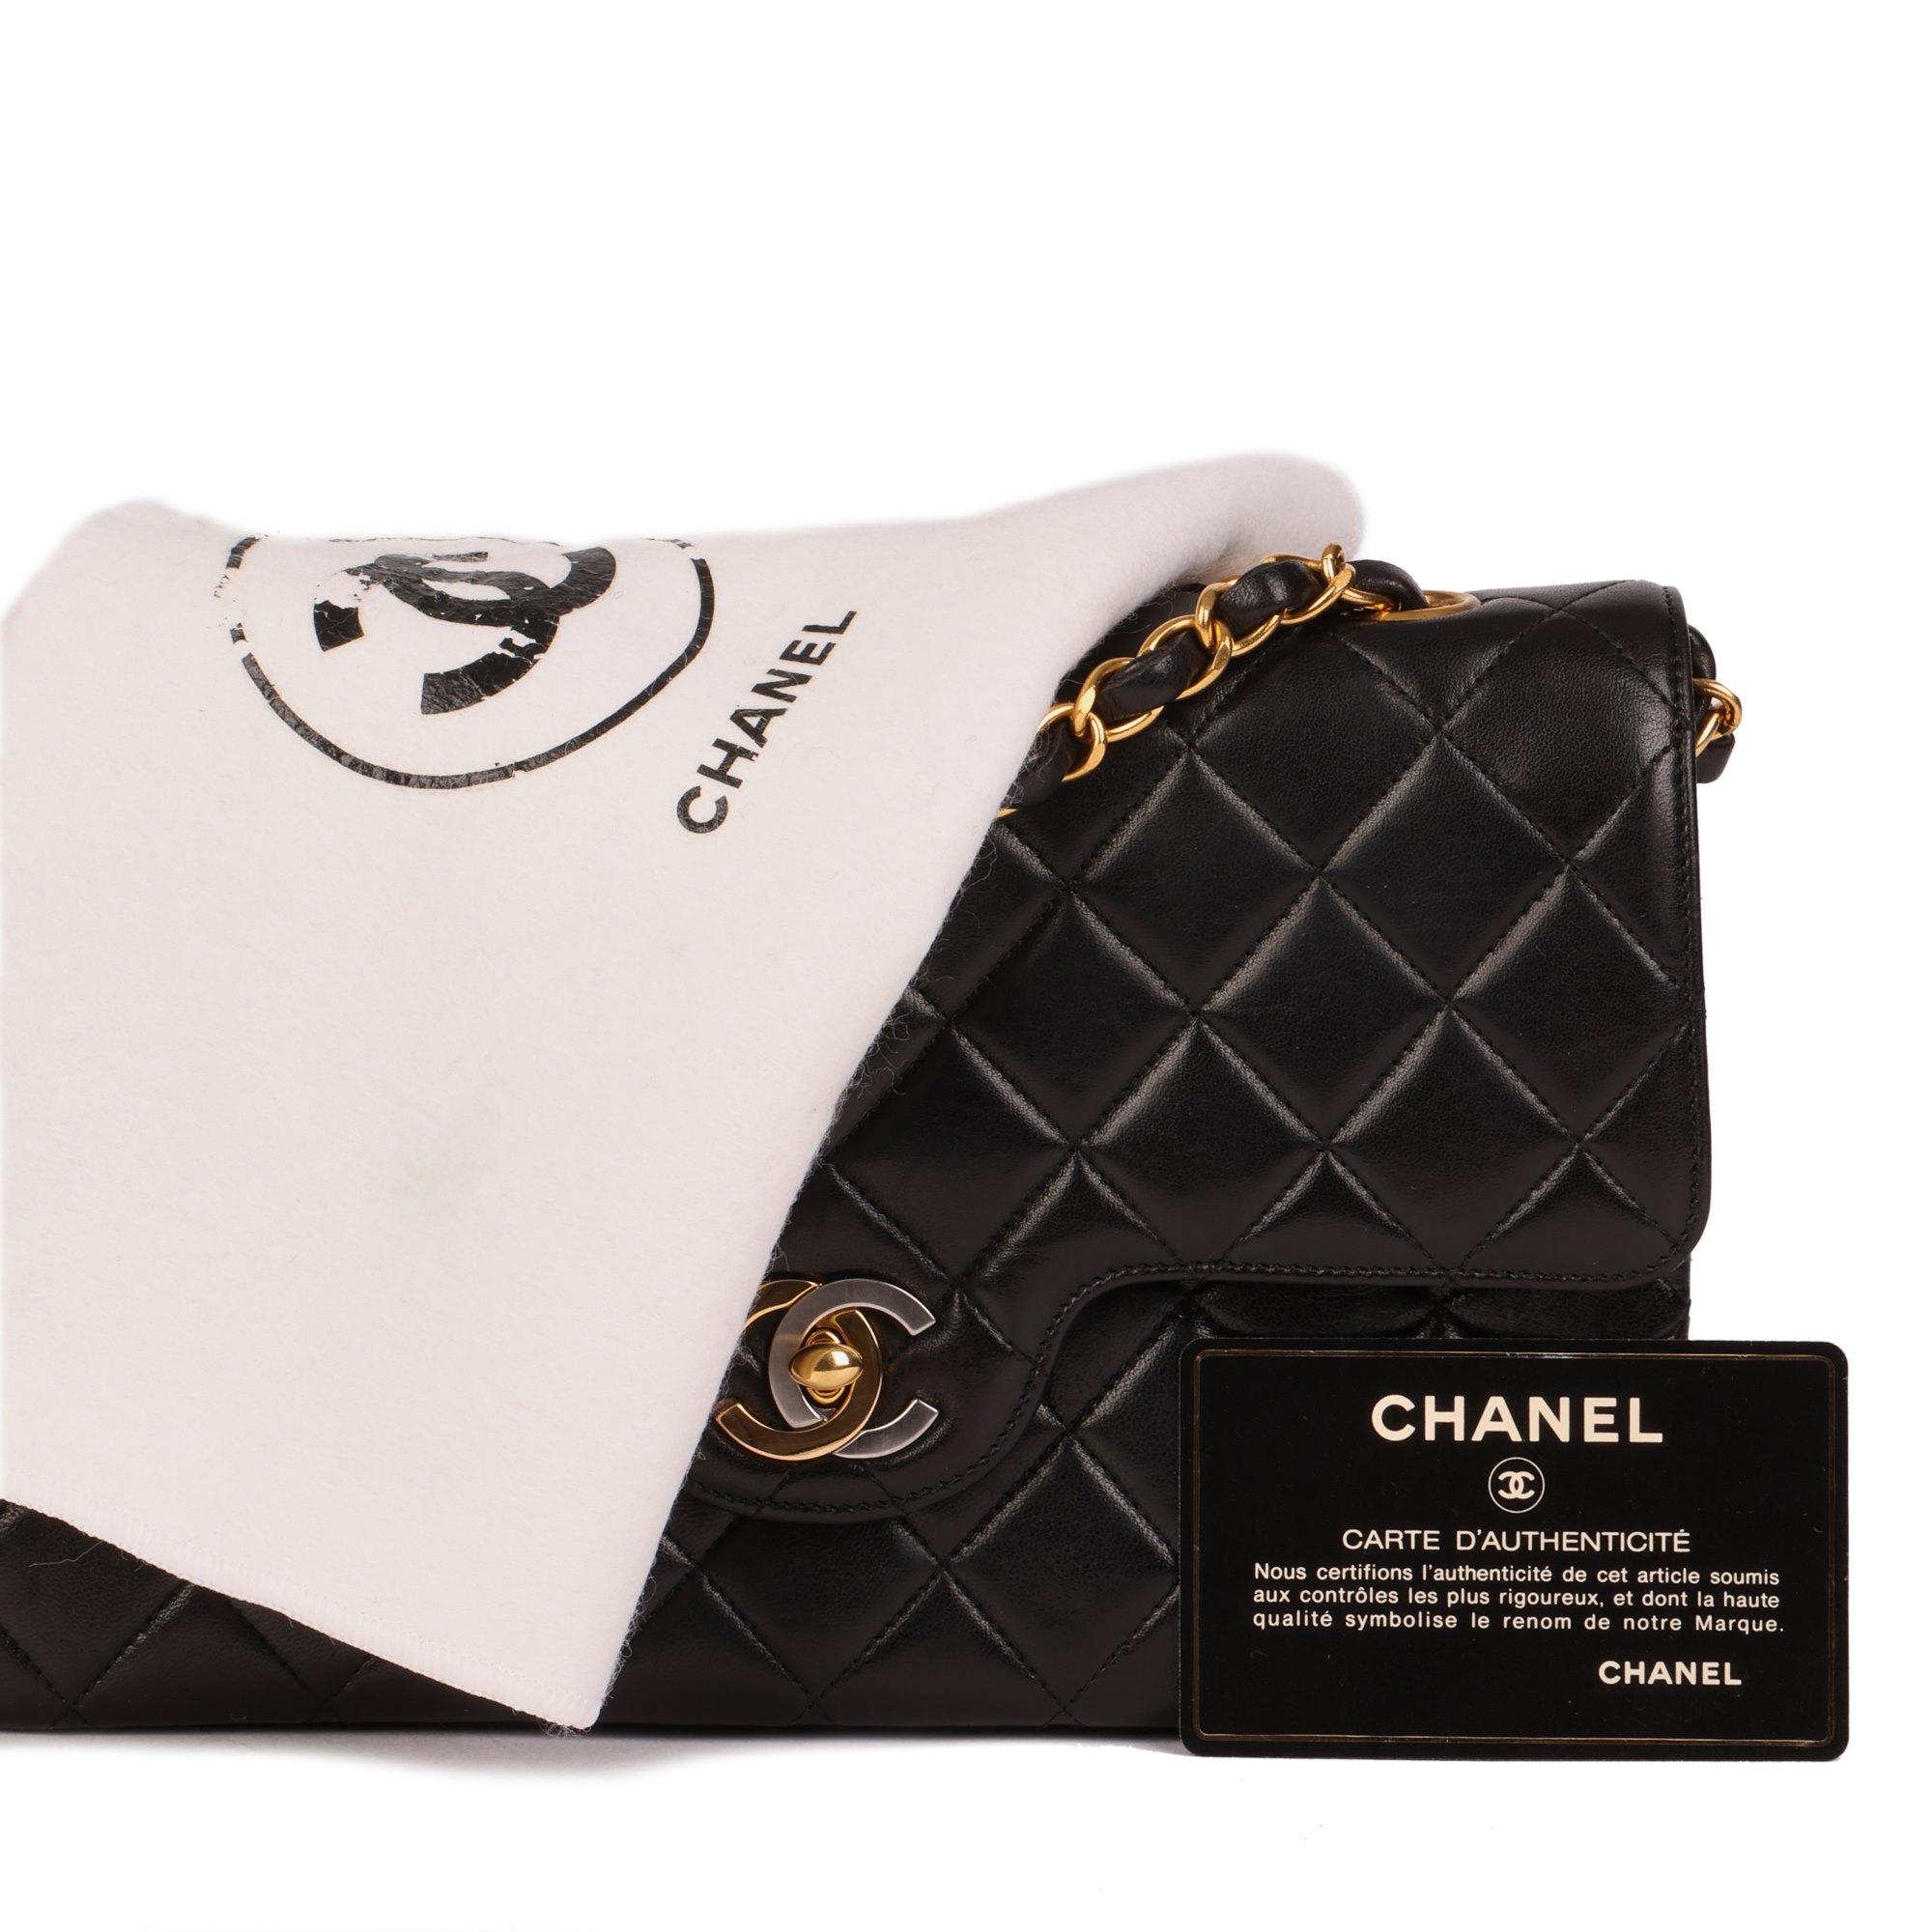 Chanel Black Quilted Lambskin Vintage Small Paris-Limited Classic Double Flap Bag